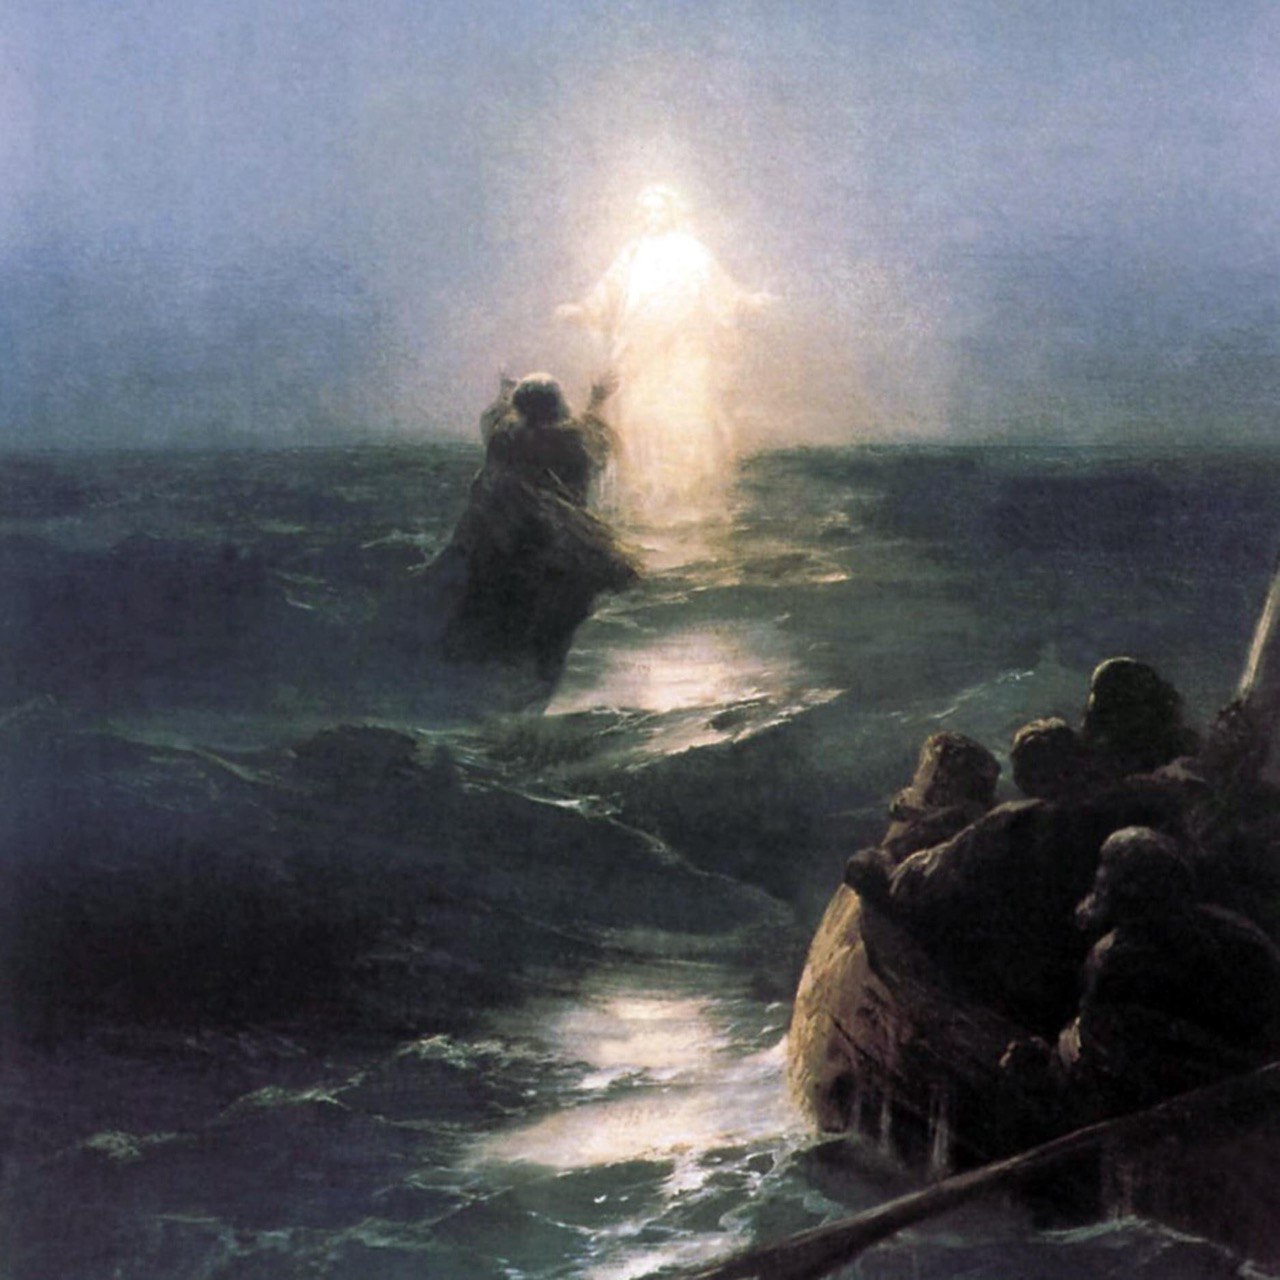 Christ from Waters